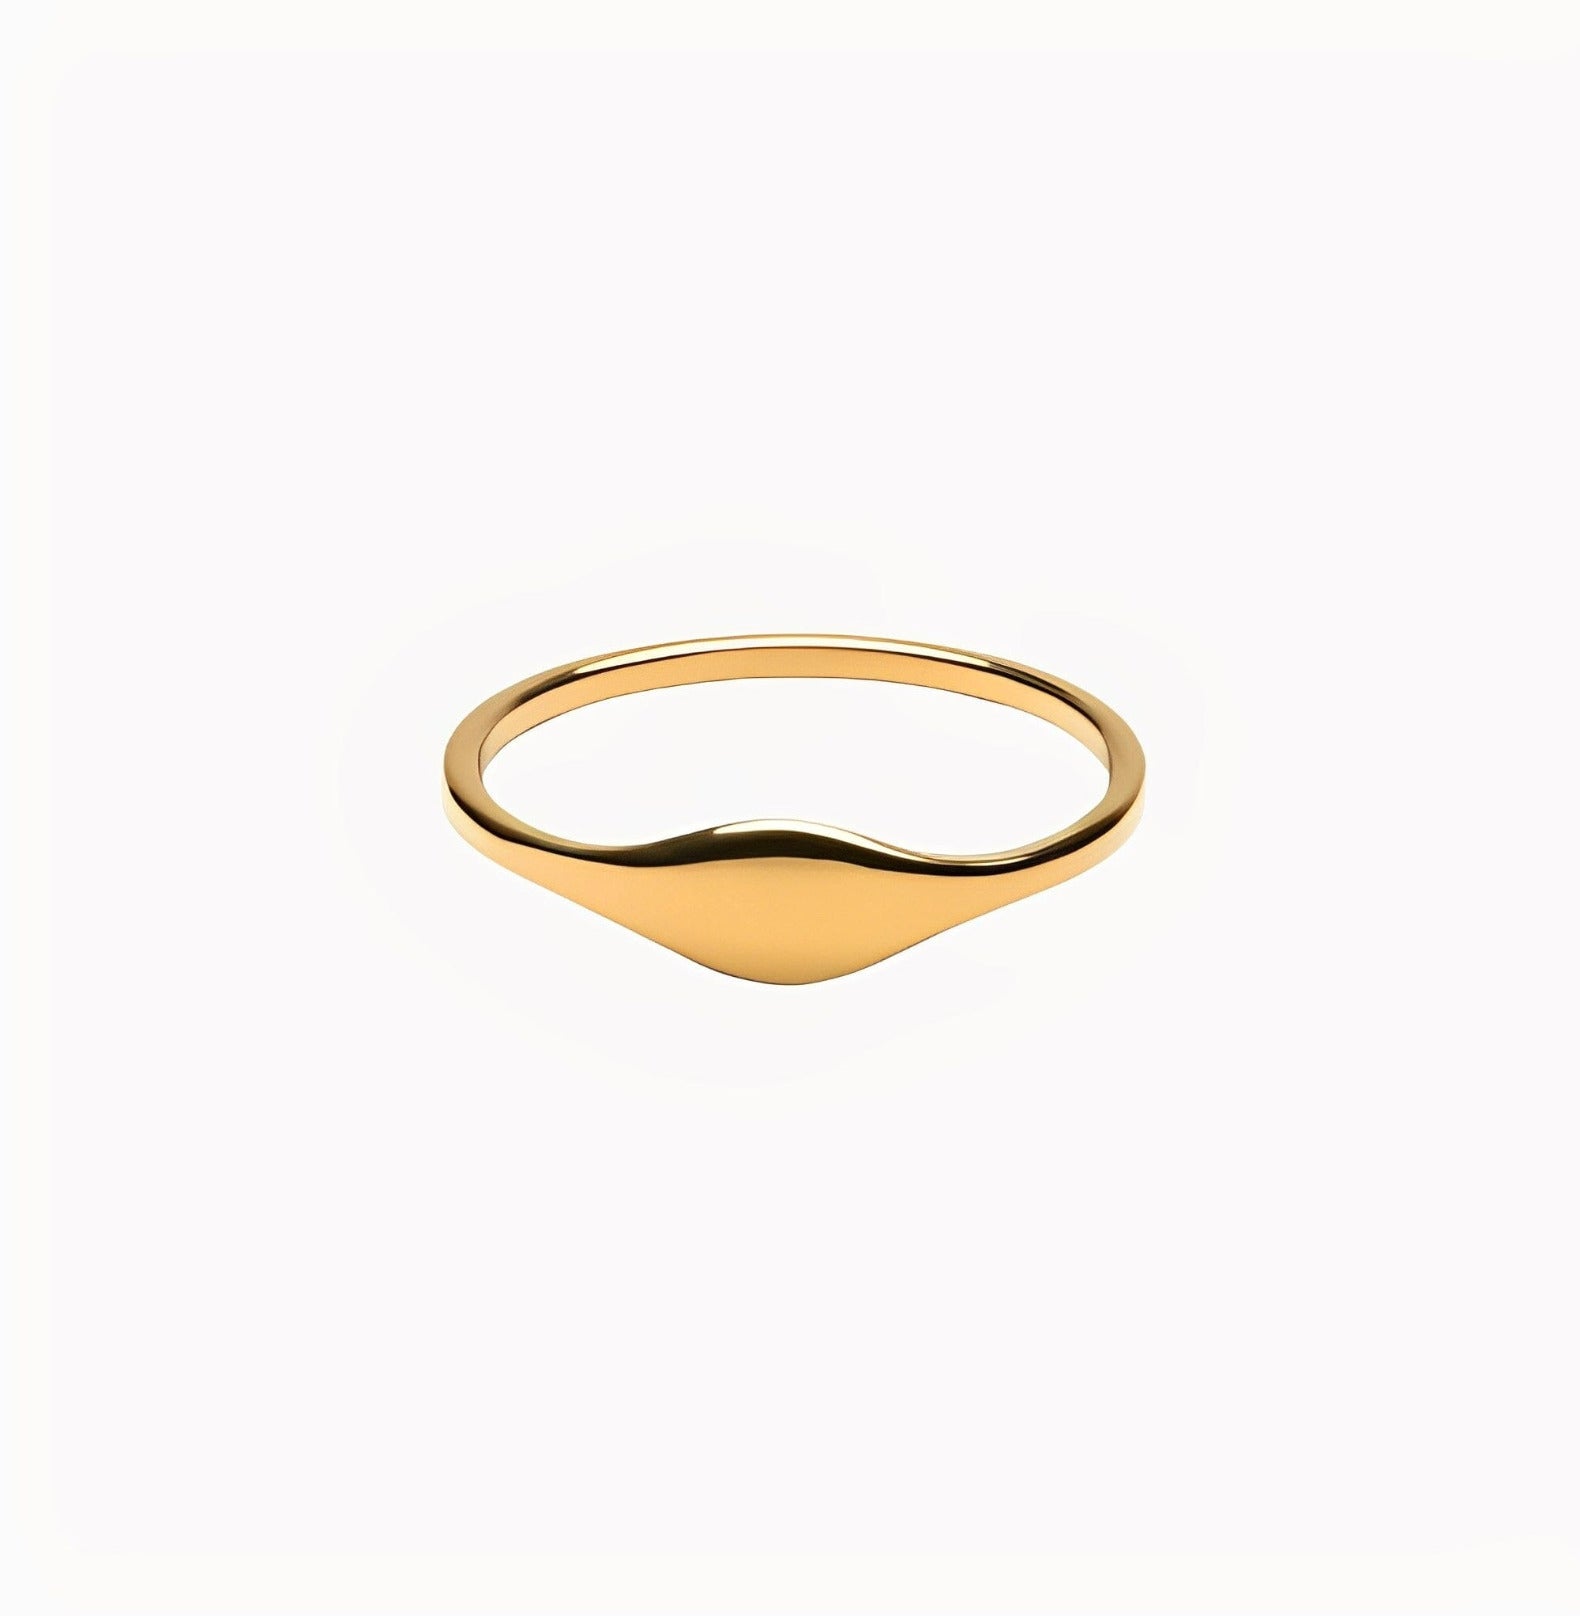 GRACE CURVED RING ring Yubama Jewelry Online Store - The Elegant Designs of Gold and Silver ! Gold Number5 